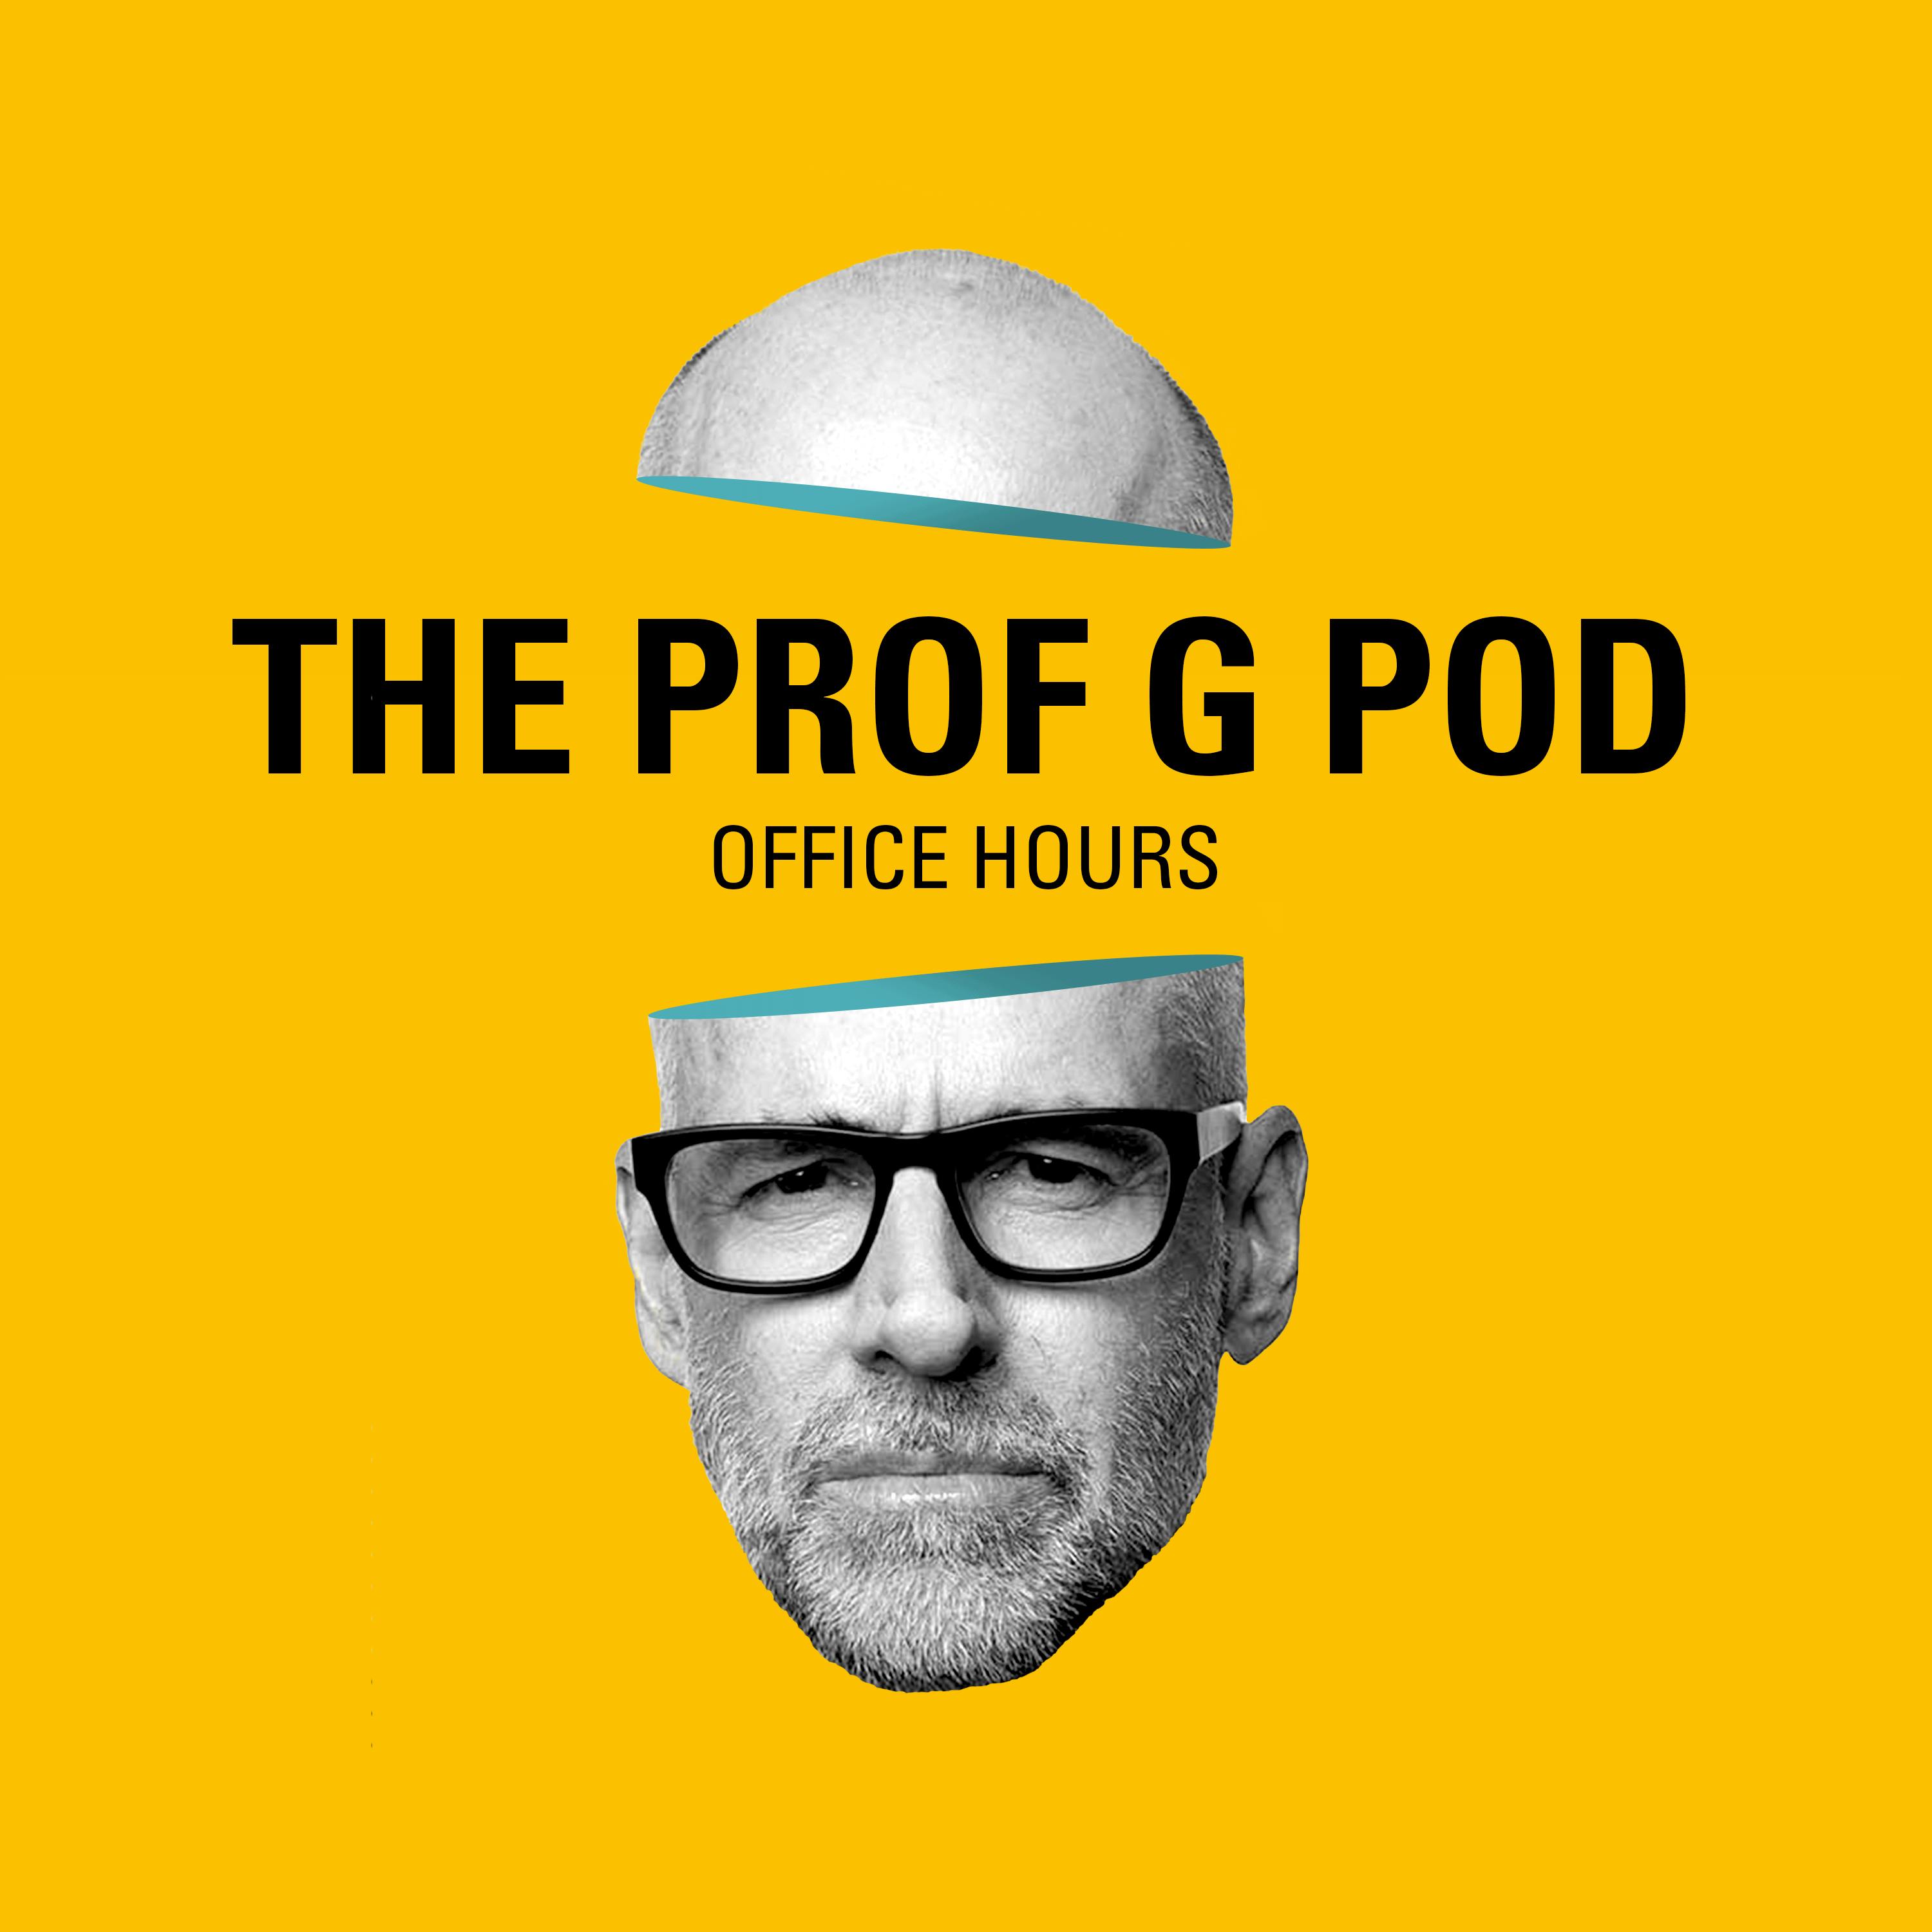 Office Hours: Cause-Related Marketing, Why Young People Should Get to a City, and How to Talk to Your Boss About Career Development